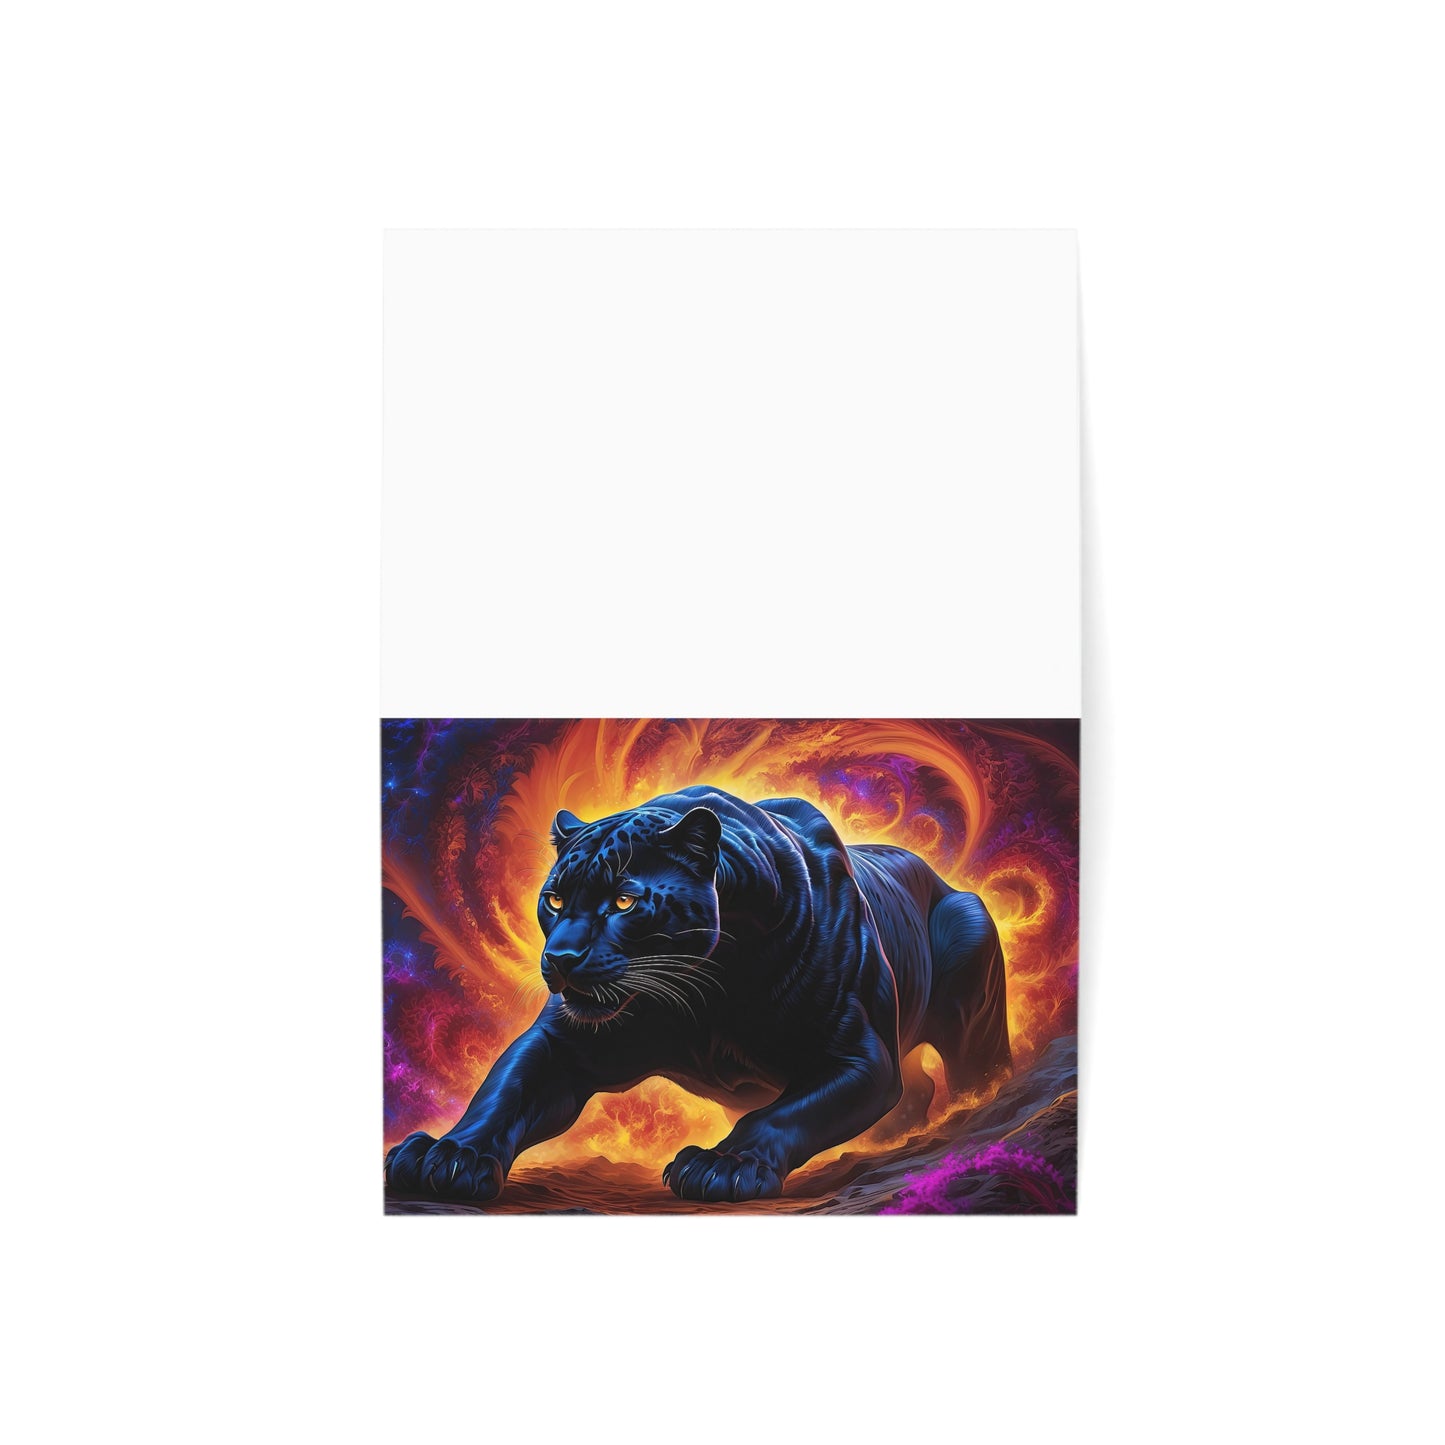 Panther's Gaze: Greeting Cards Collection (1, 10, 30, and 50pcs)